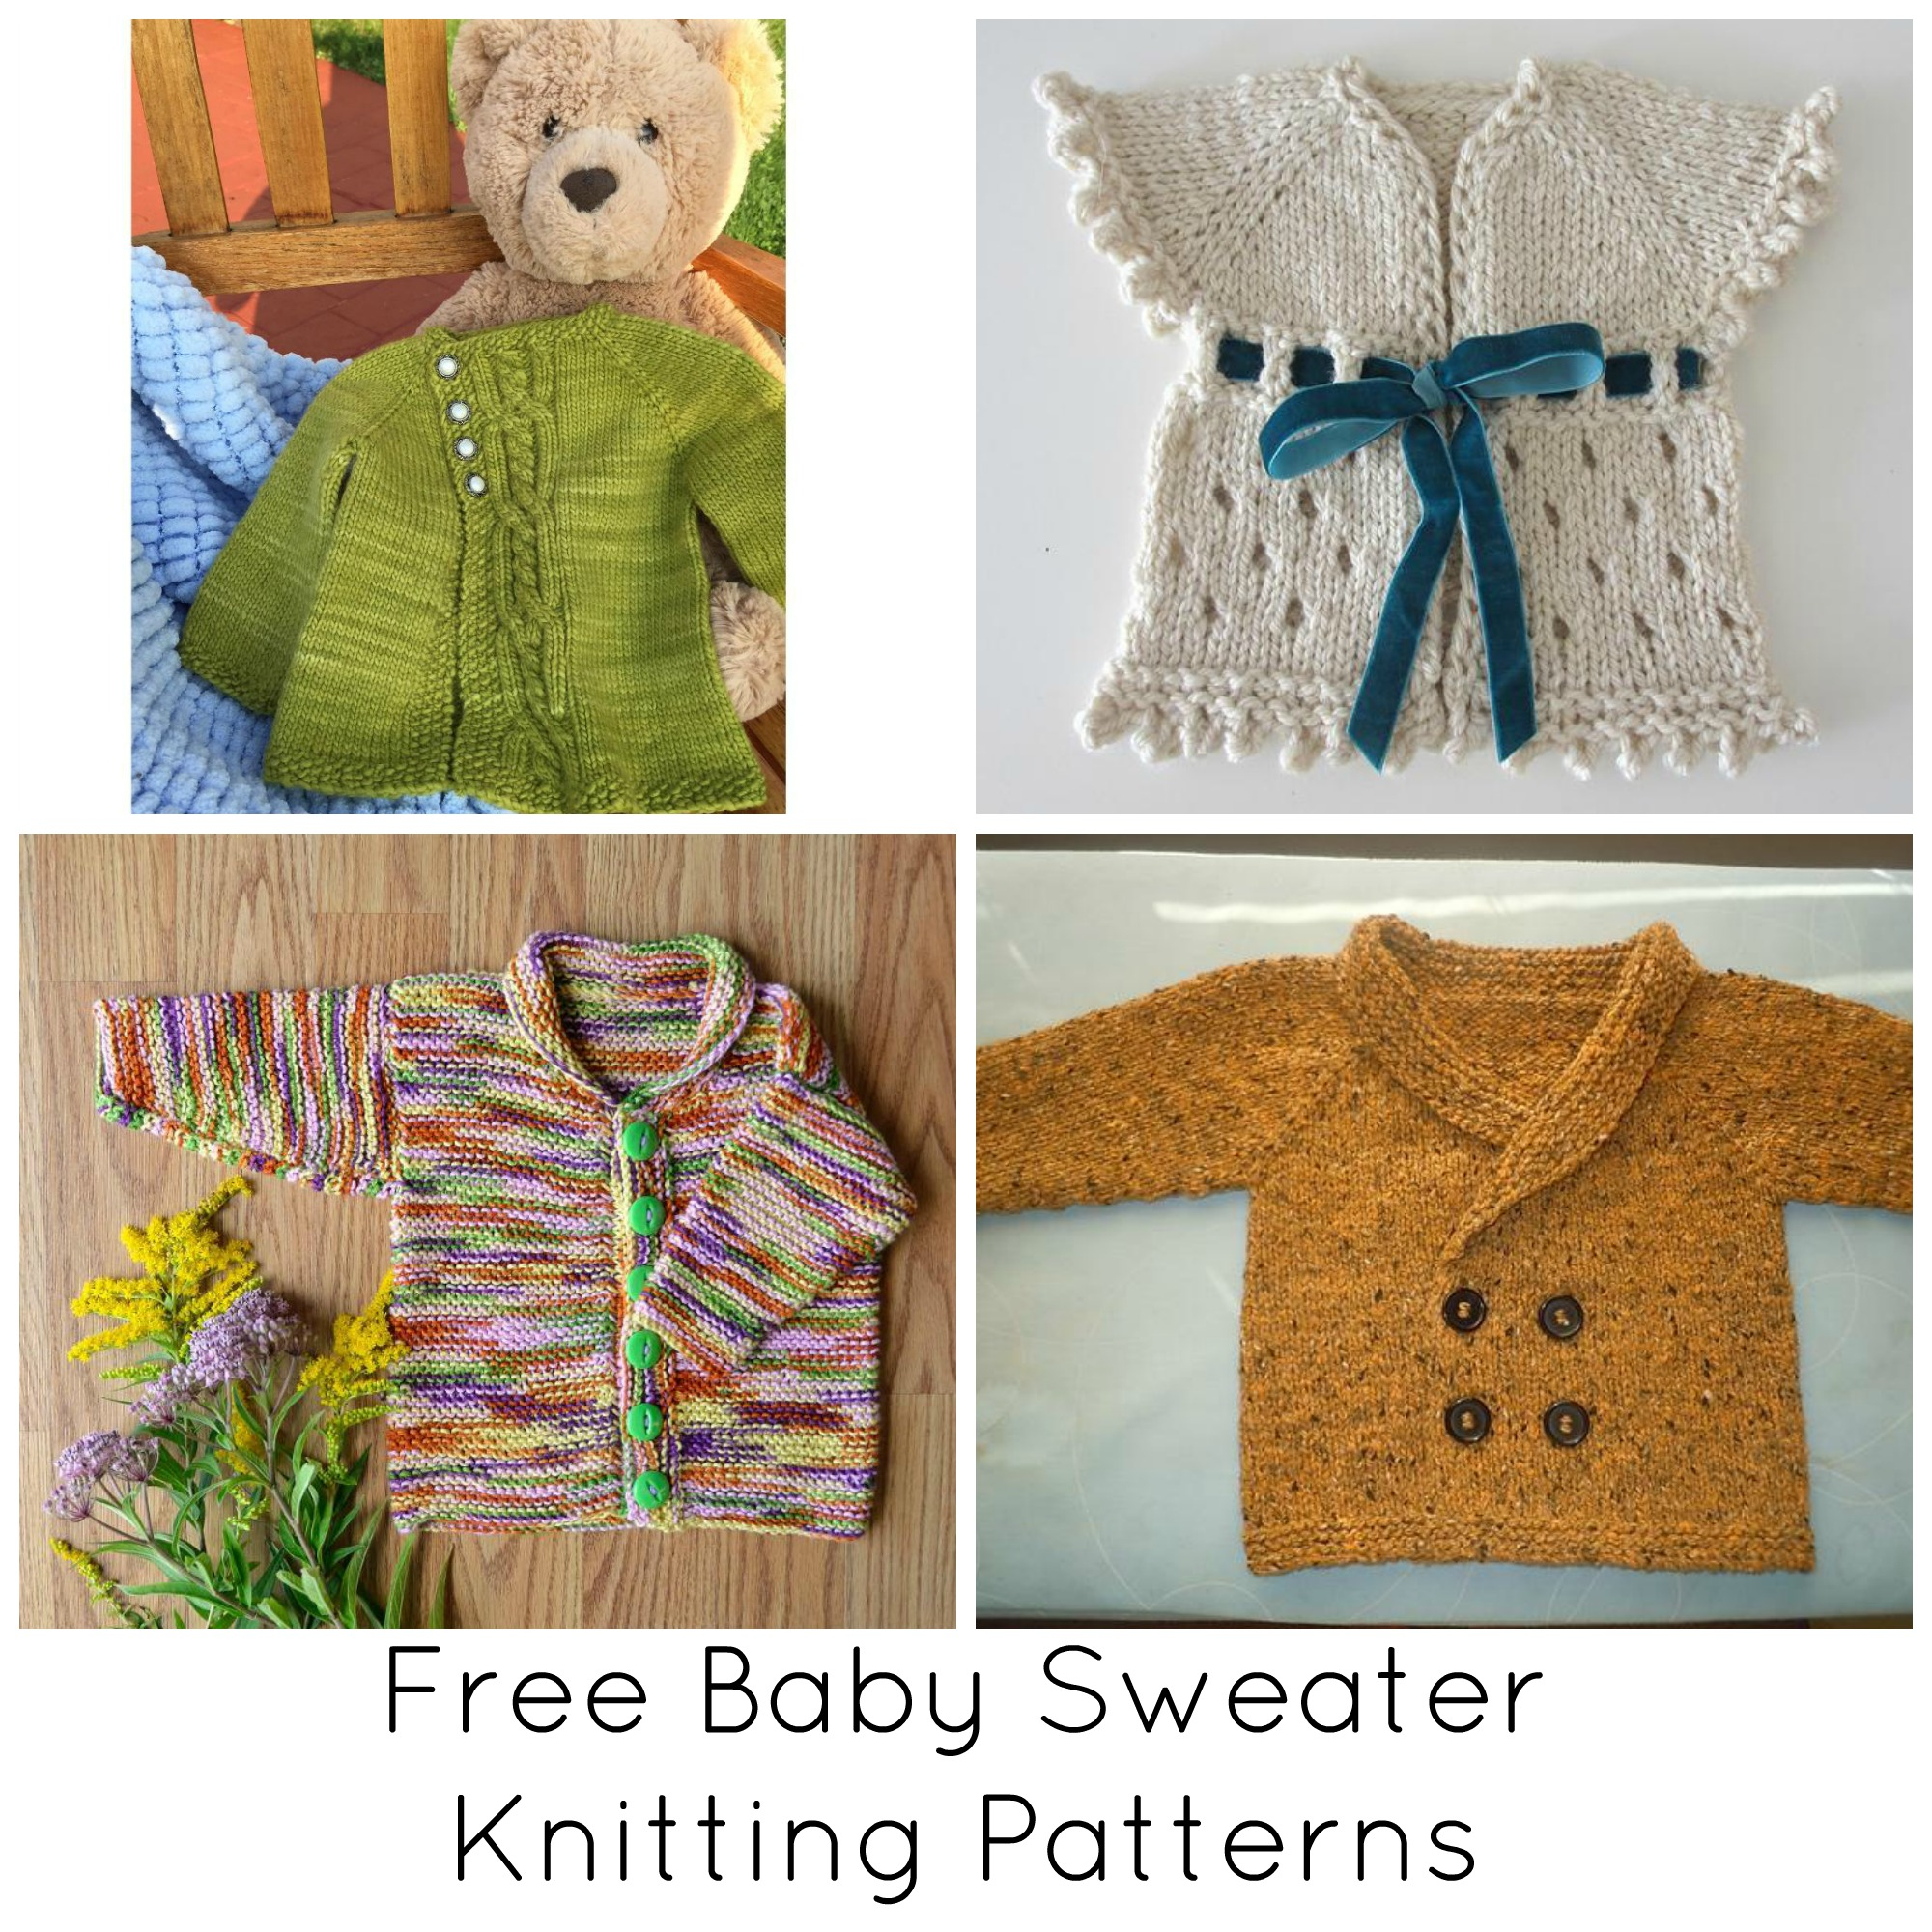 Free Knitting Patterns For Sweater Coats Our Favorite Free Ba Sweater Knitting Patterns